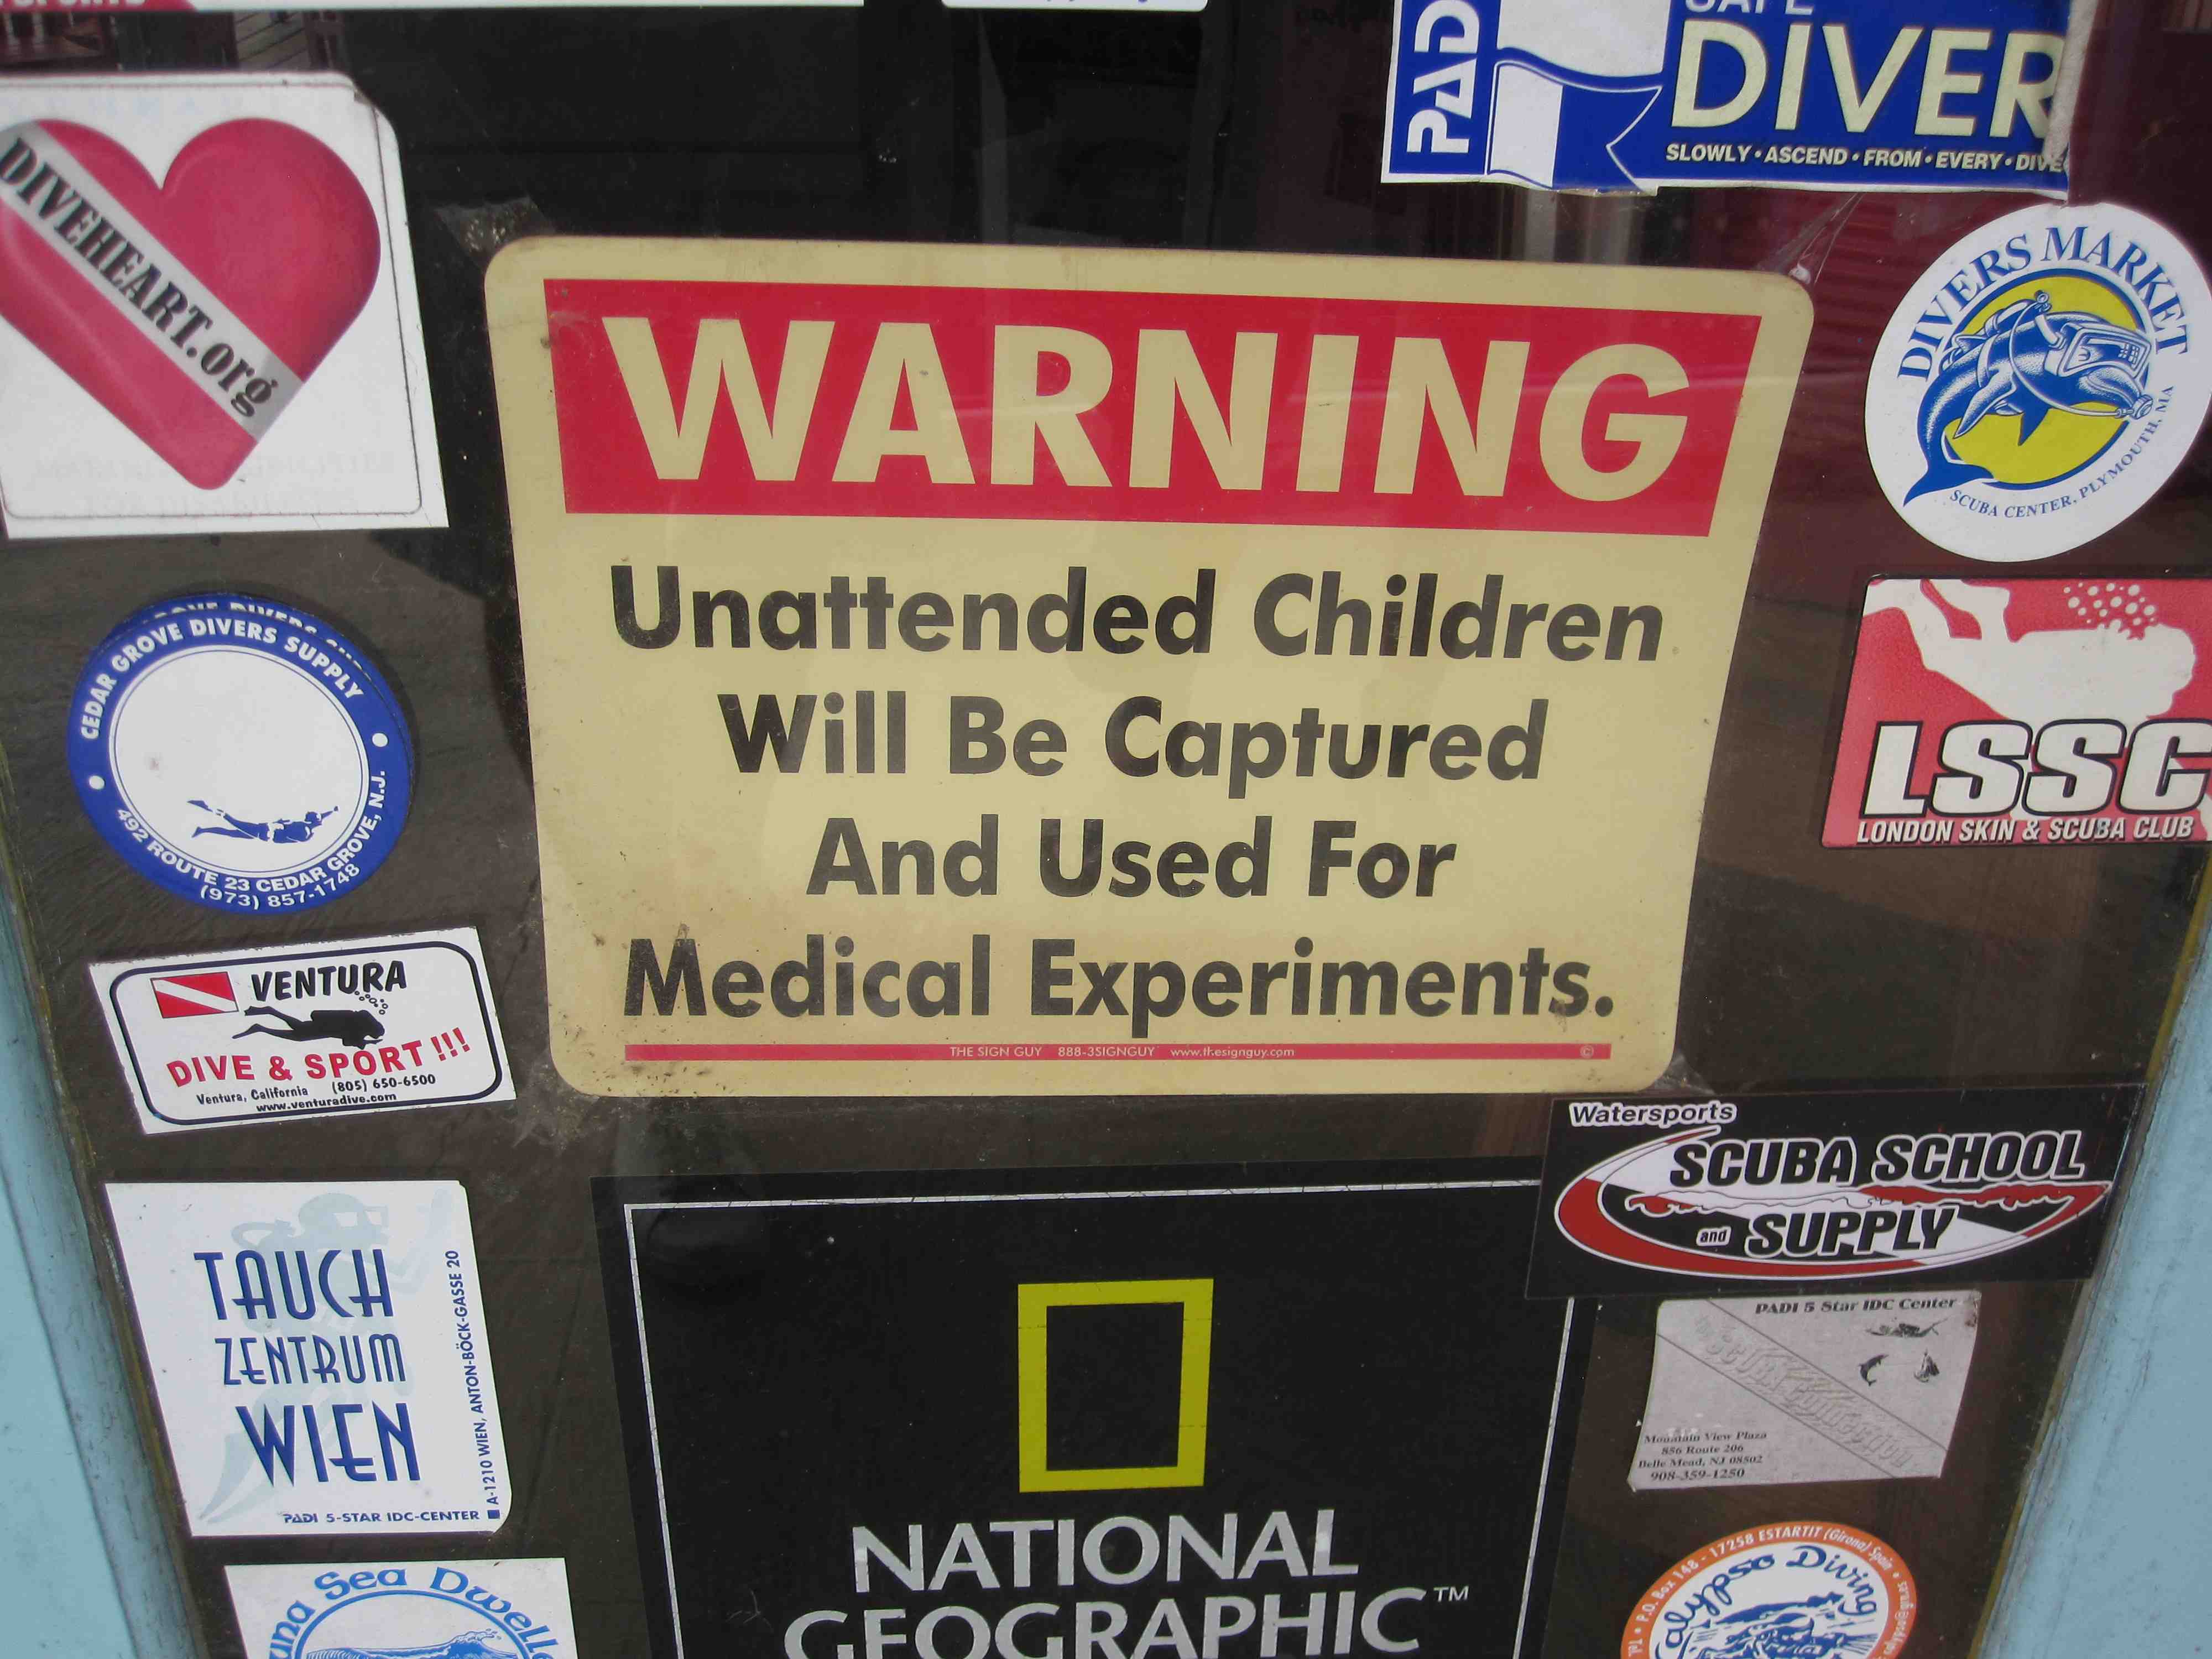 Sign on dive shop door: "Warning: unattended
            children will be captured and used for medical
            experiments" (this definitely requires IRB approval)